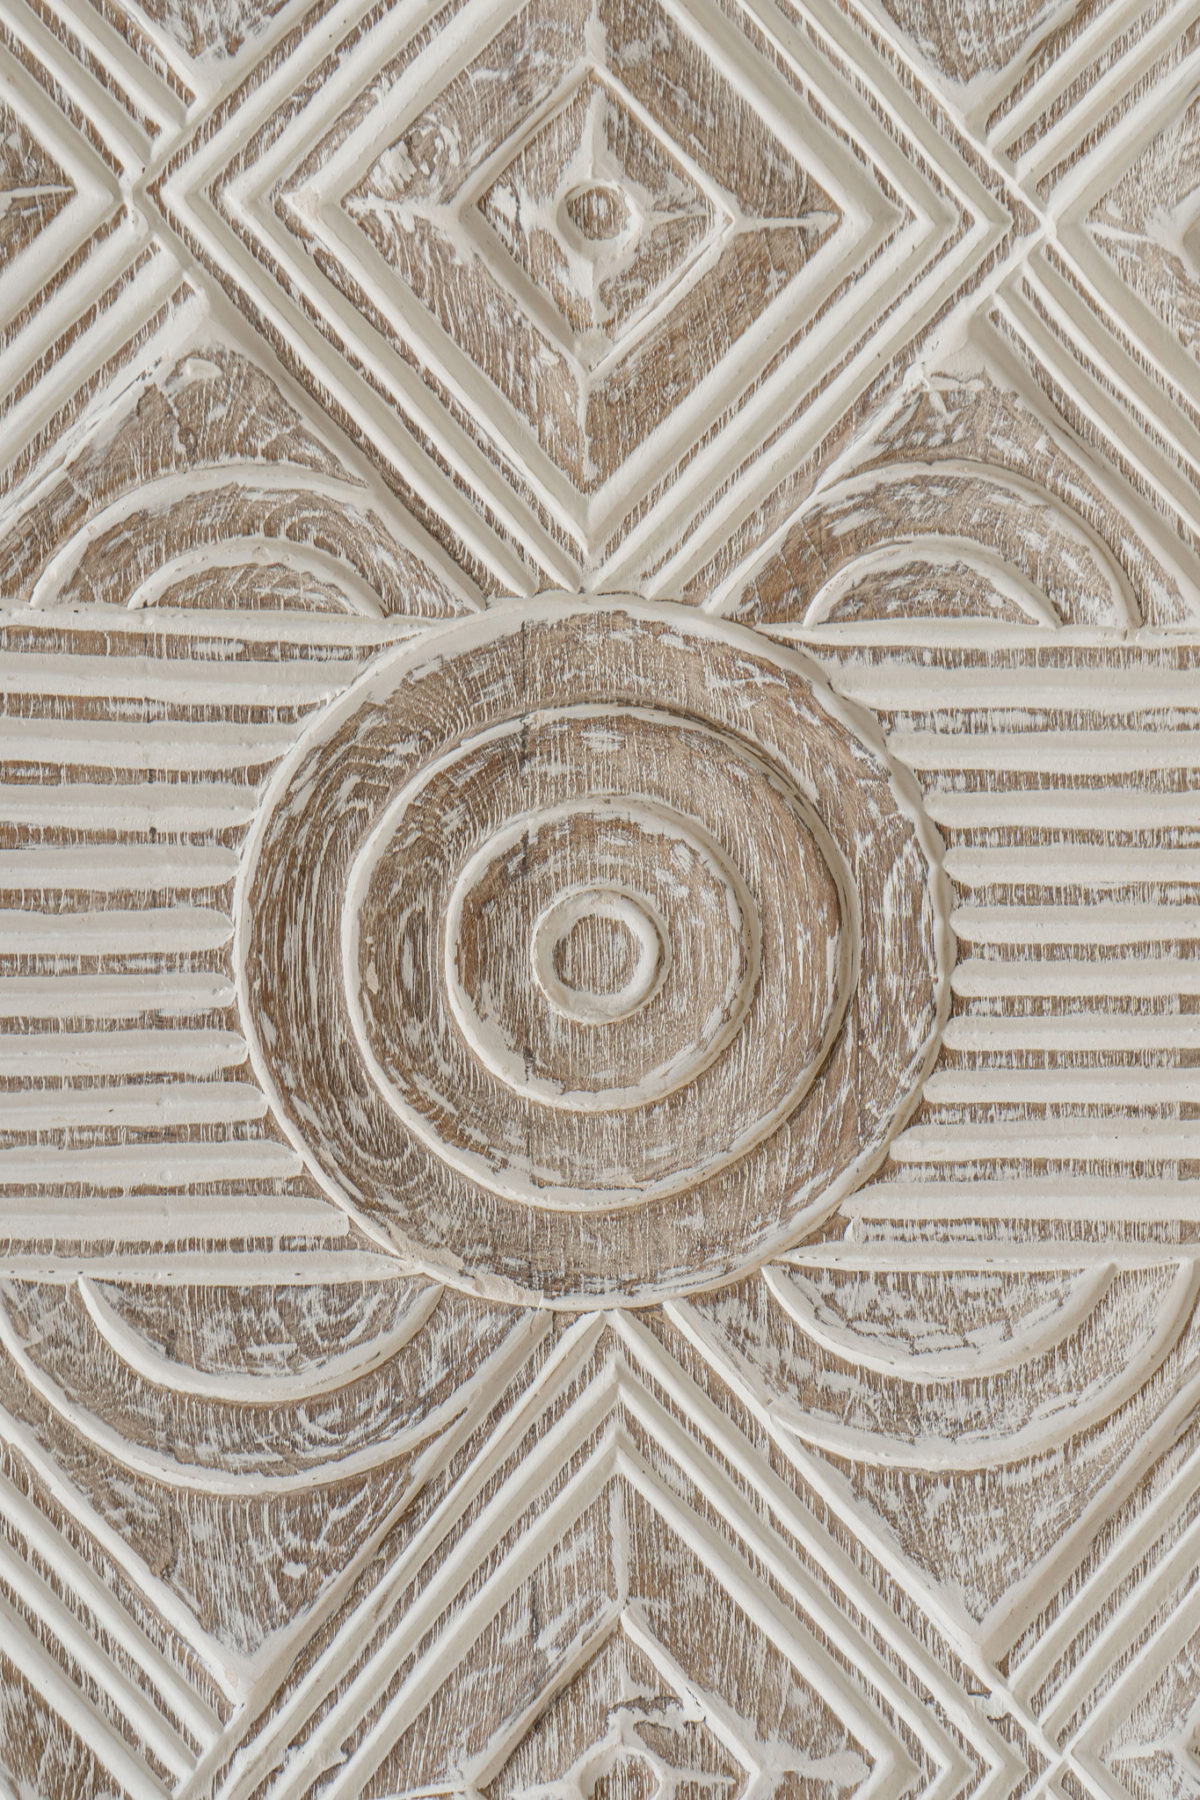 Distress white wood carving